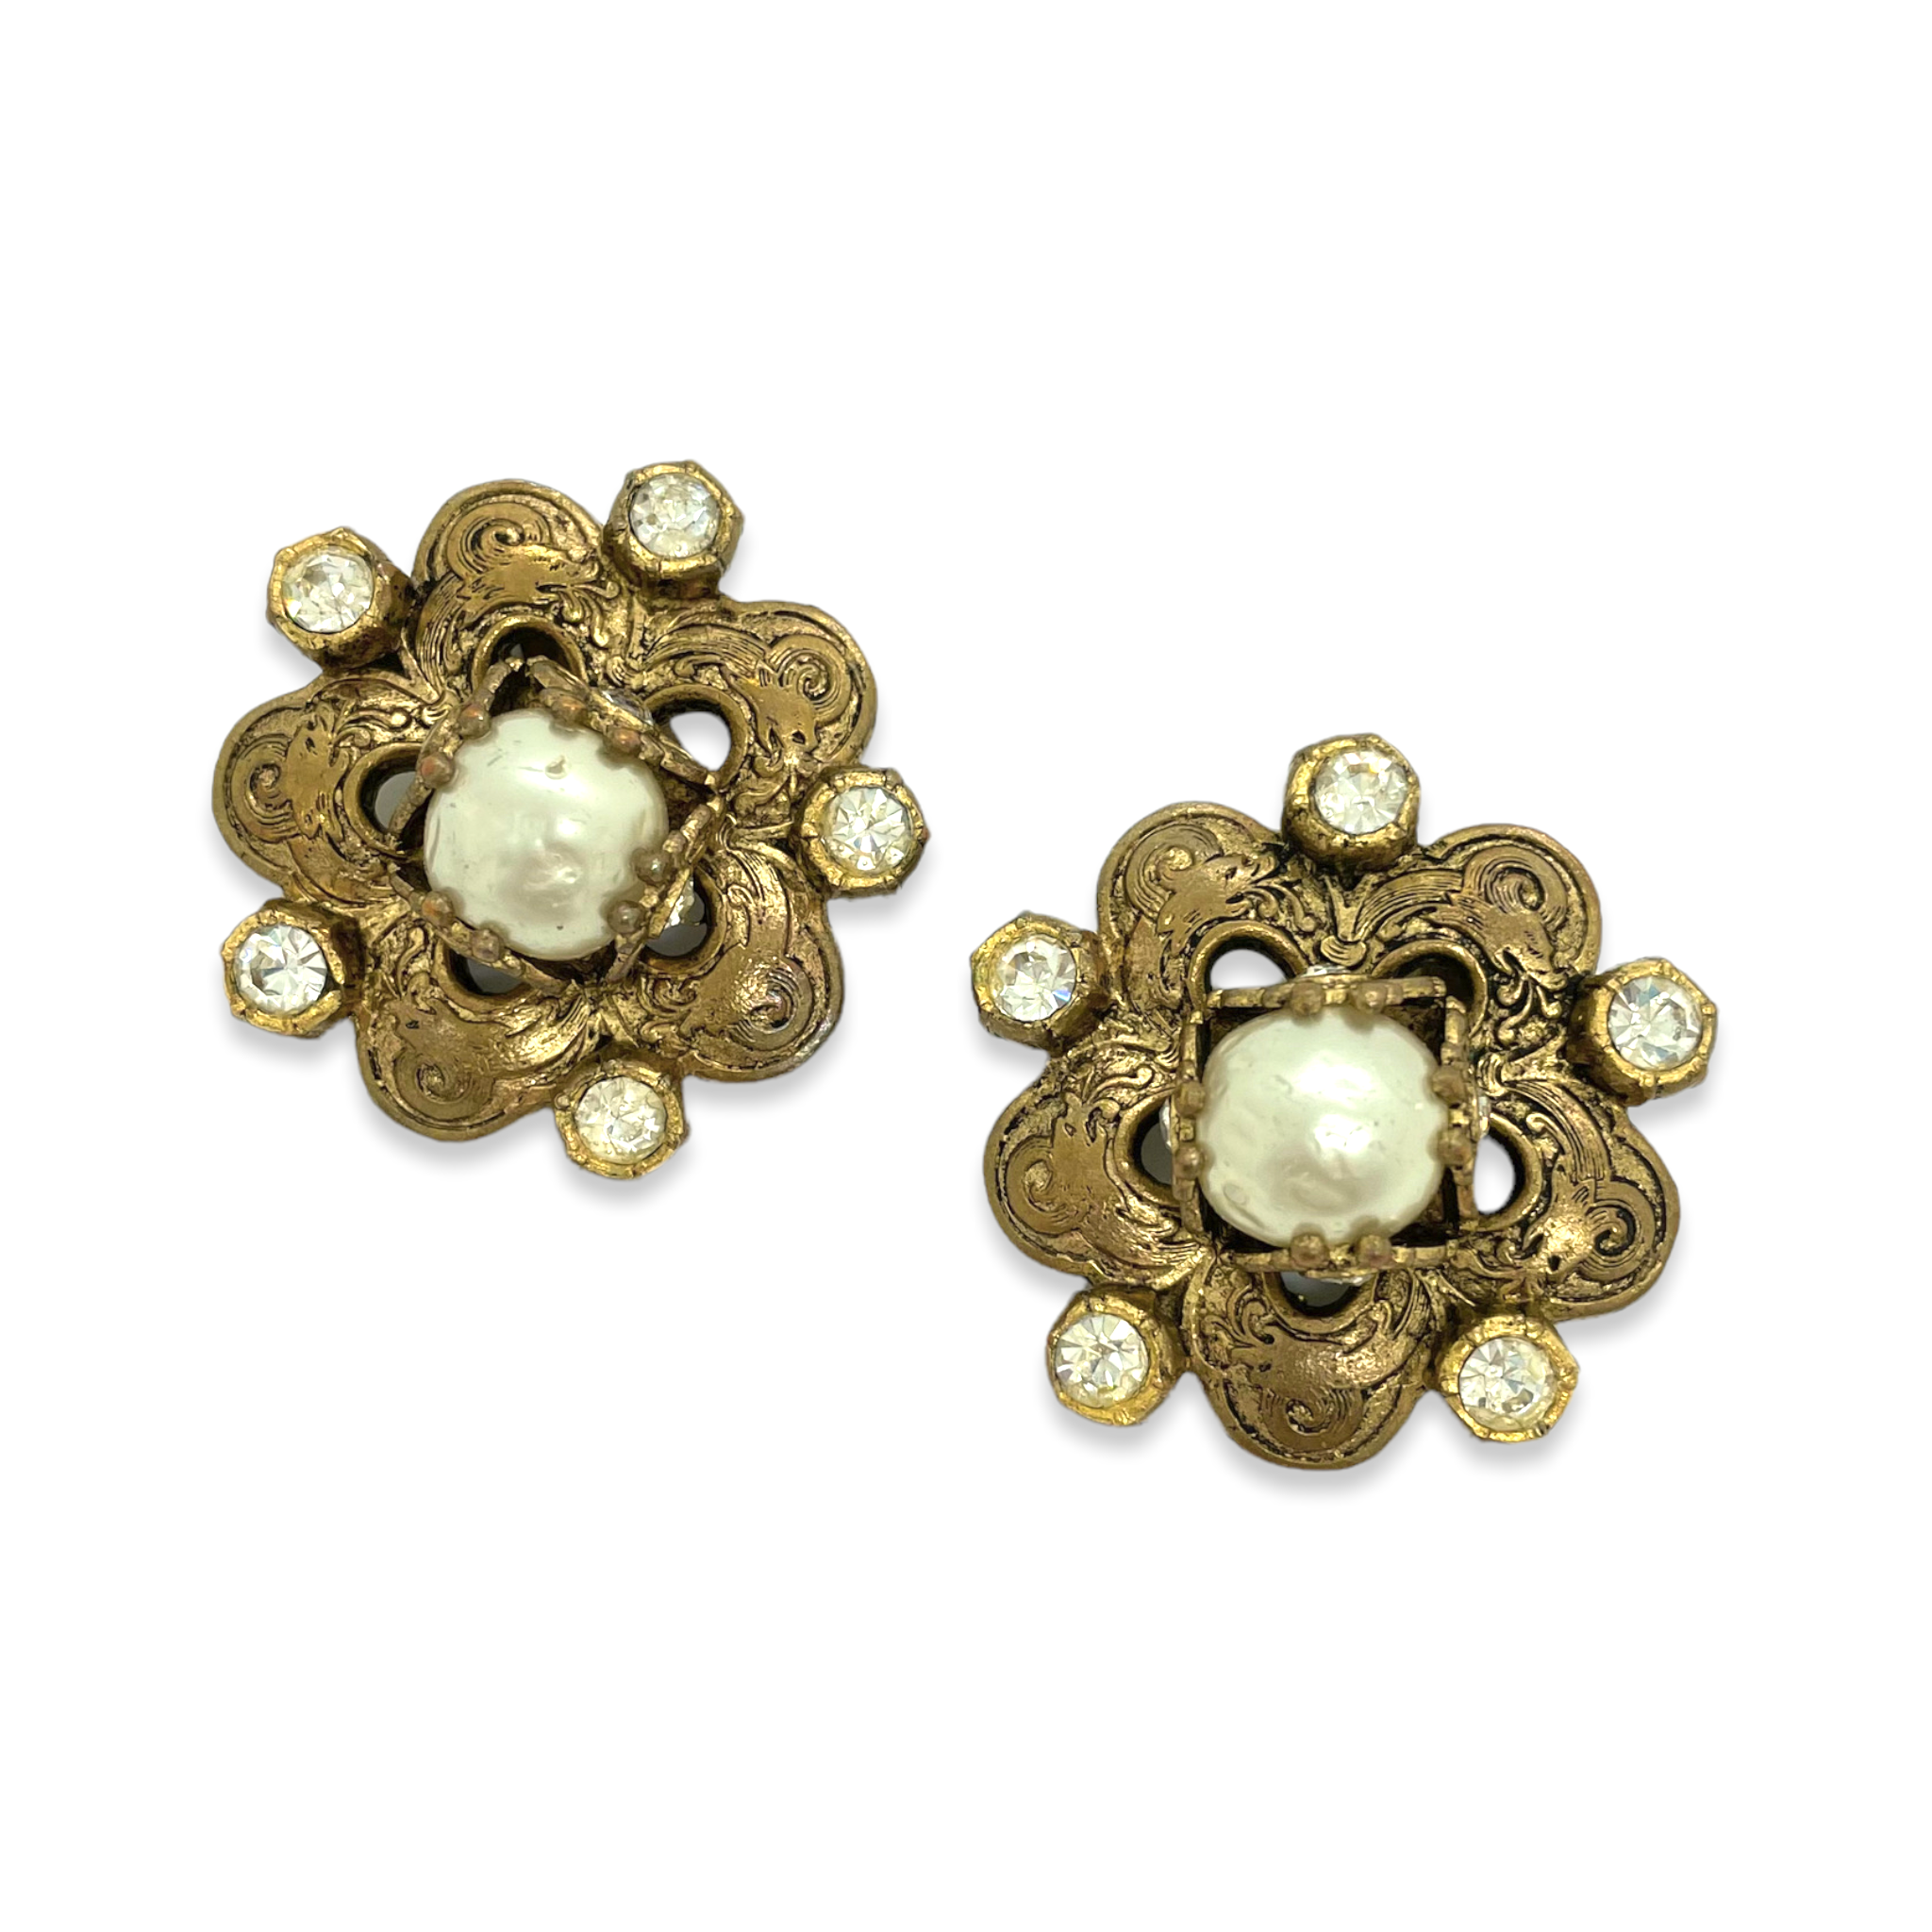 Chanel golden pearls, rhinestones and arabesques earrings in relief